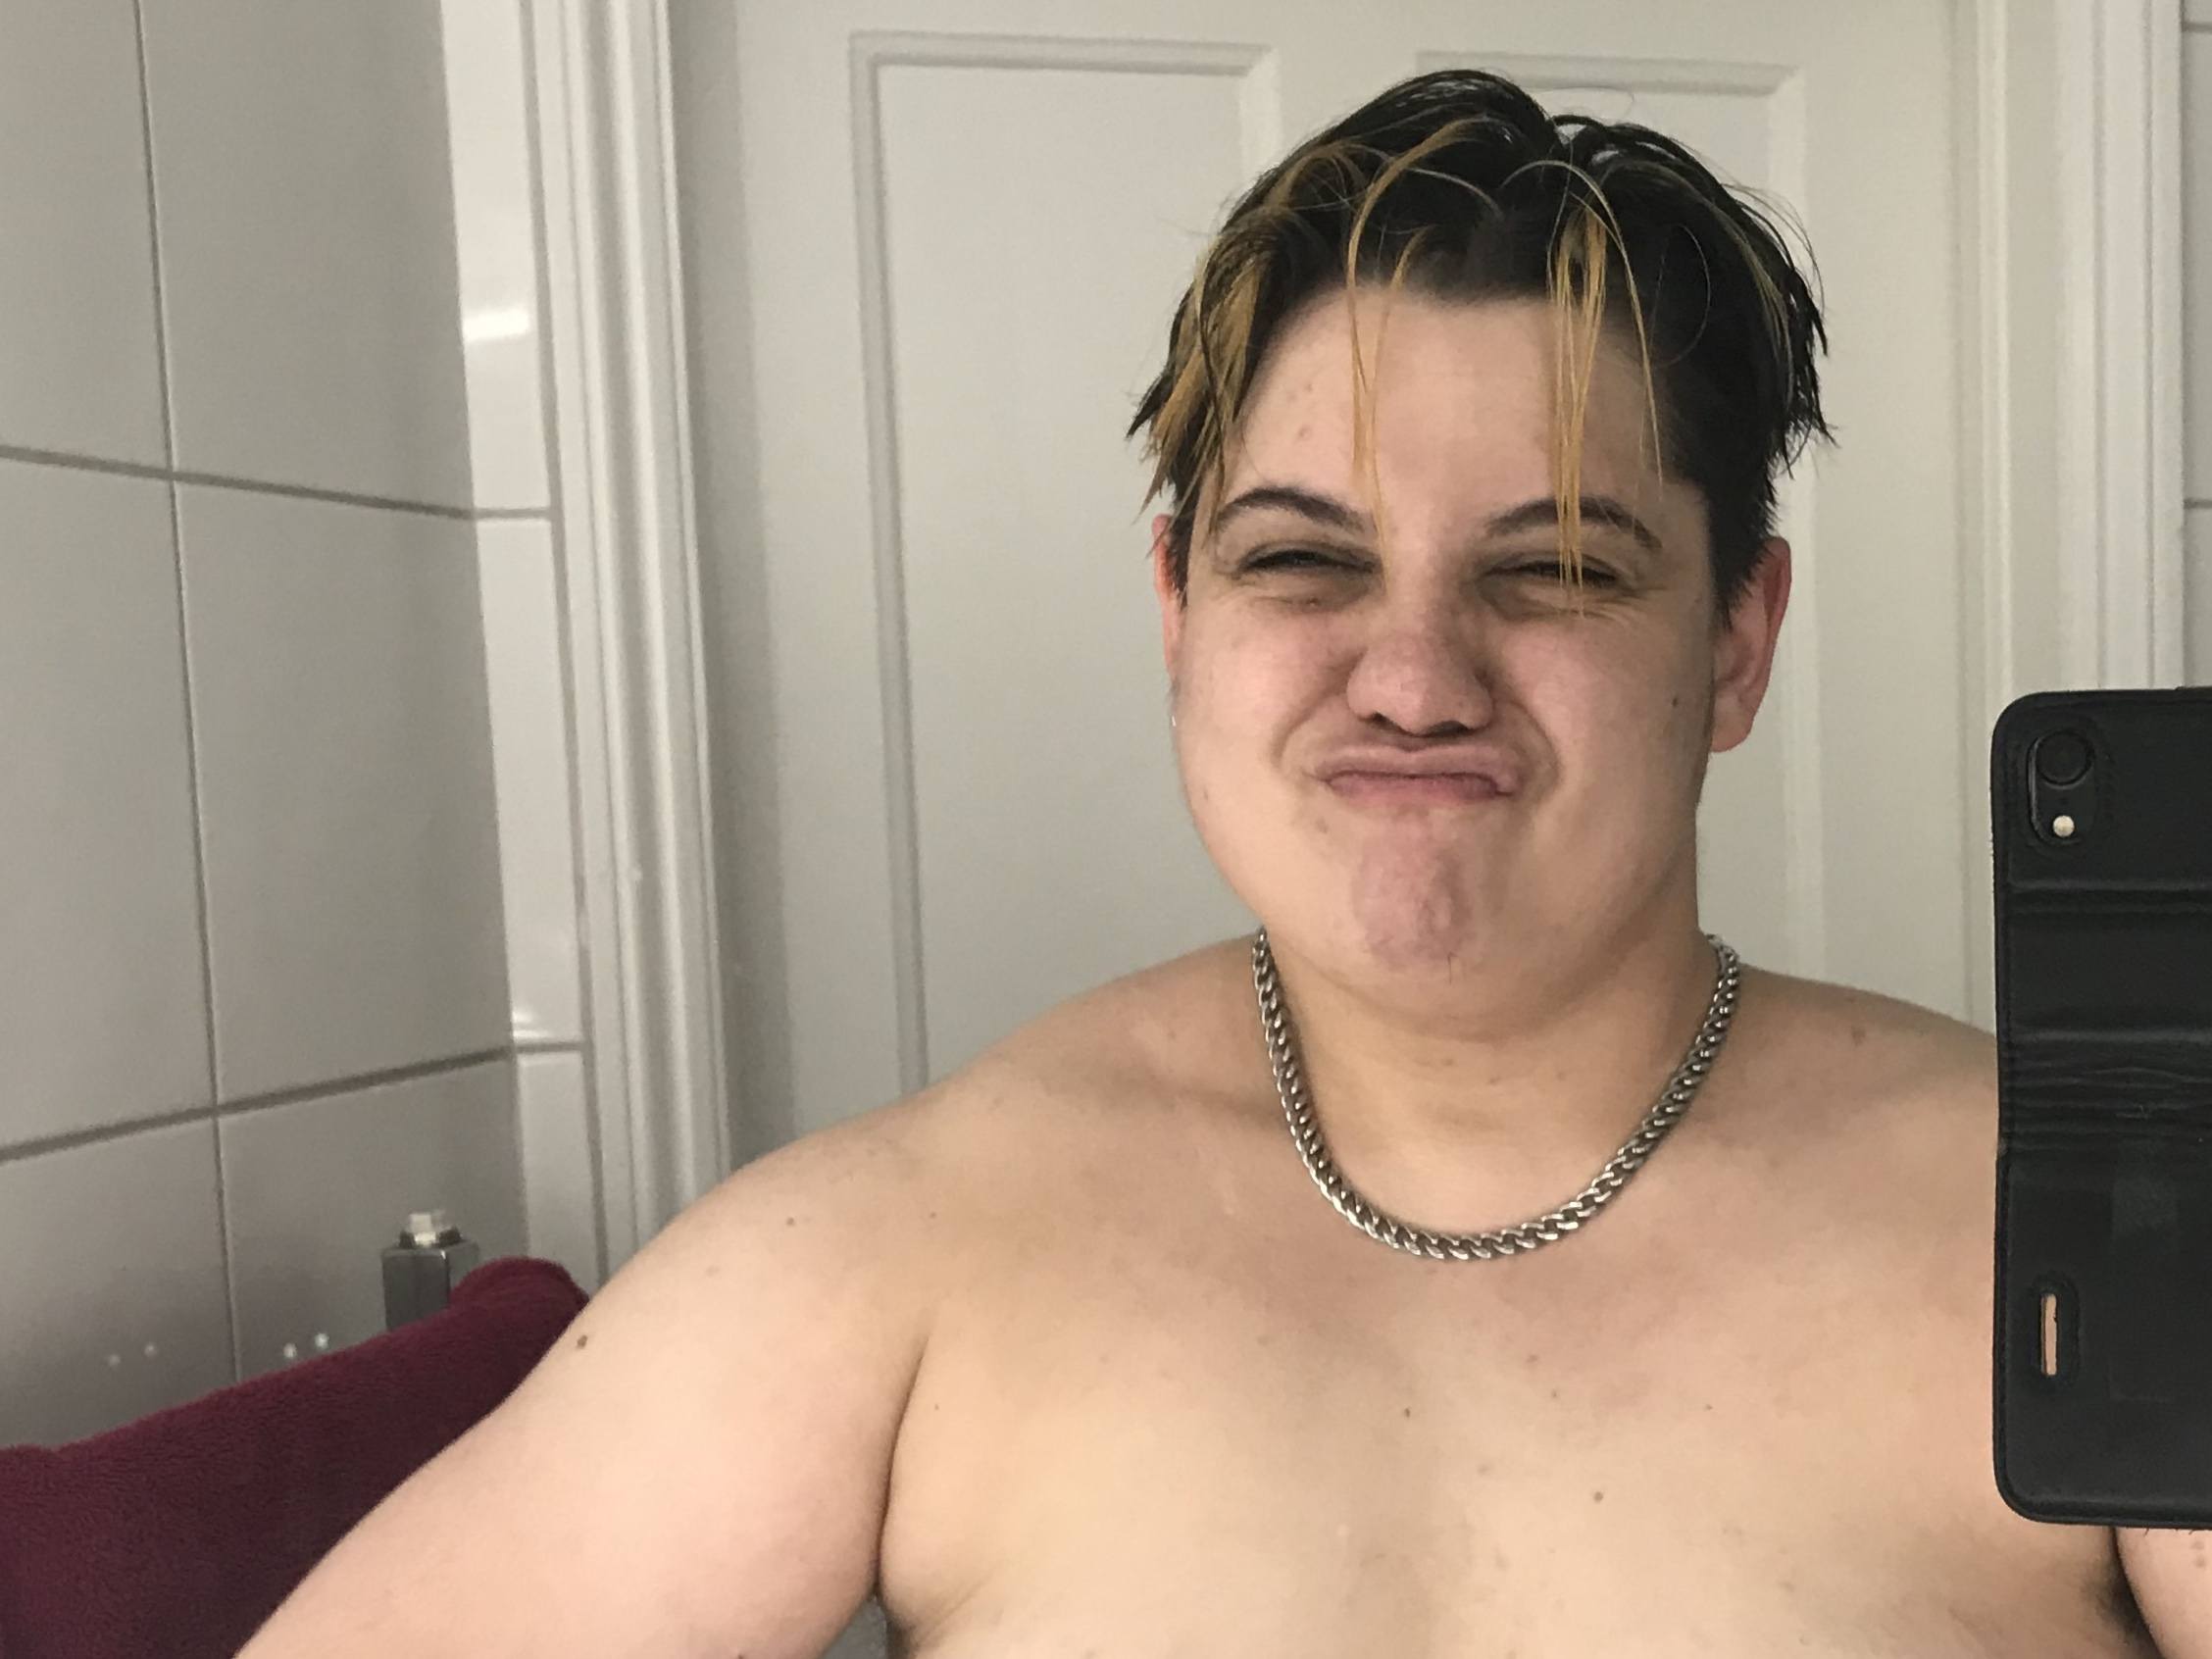 A selfie of Rabi, standing in a white-tiled bathroom topless making muscles in the mirror. He is a young, mixed-race, fair-skinned, transmasc guy with short floppy black hair with gay blonde streaks. He has a playful pout and wet hair, fresh from a bath. He is wearing a heavy silver chain.